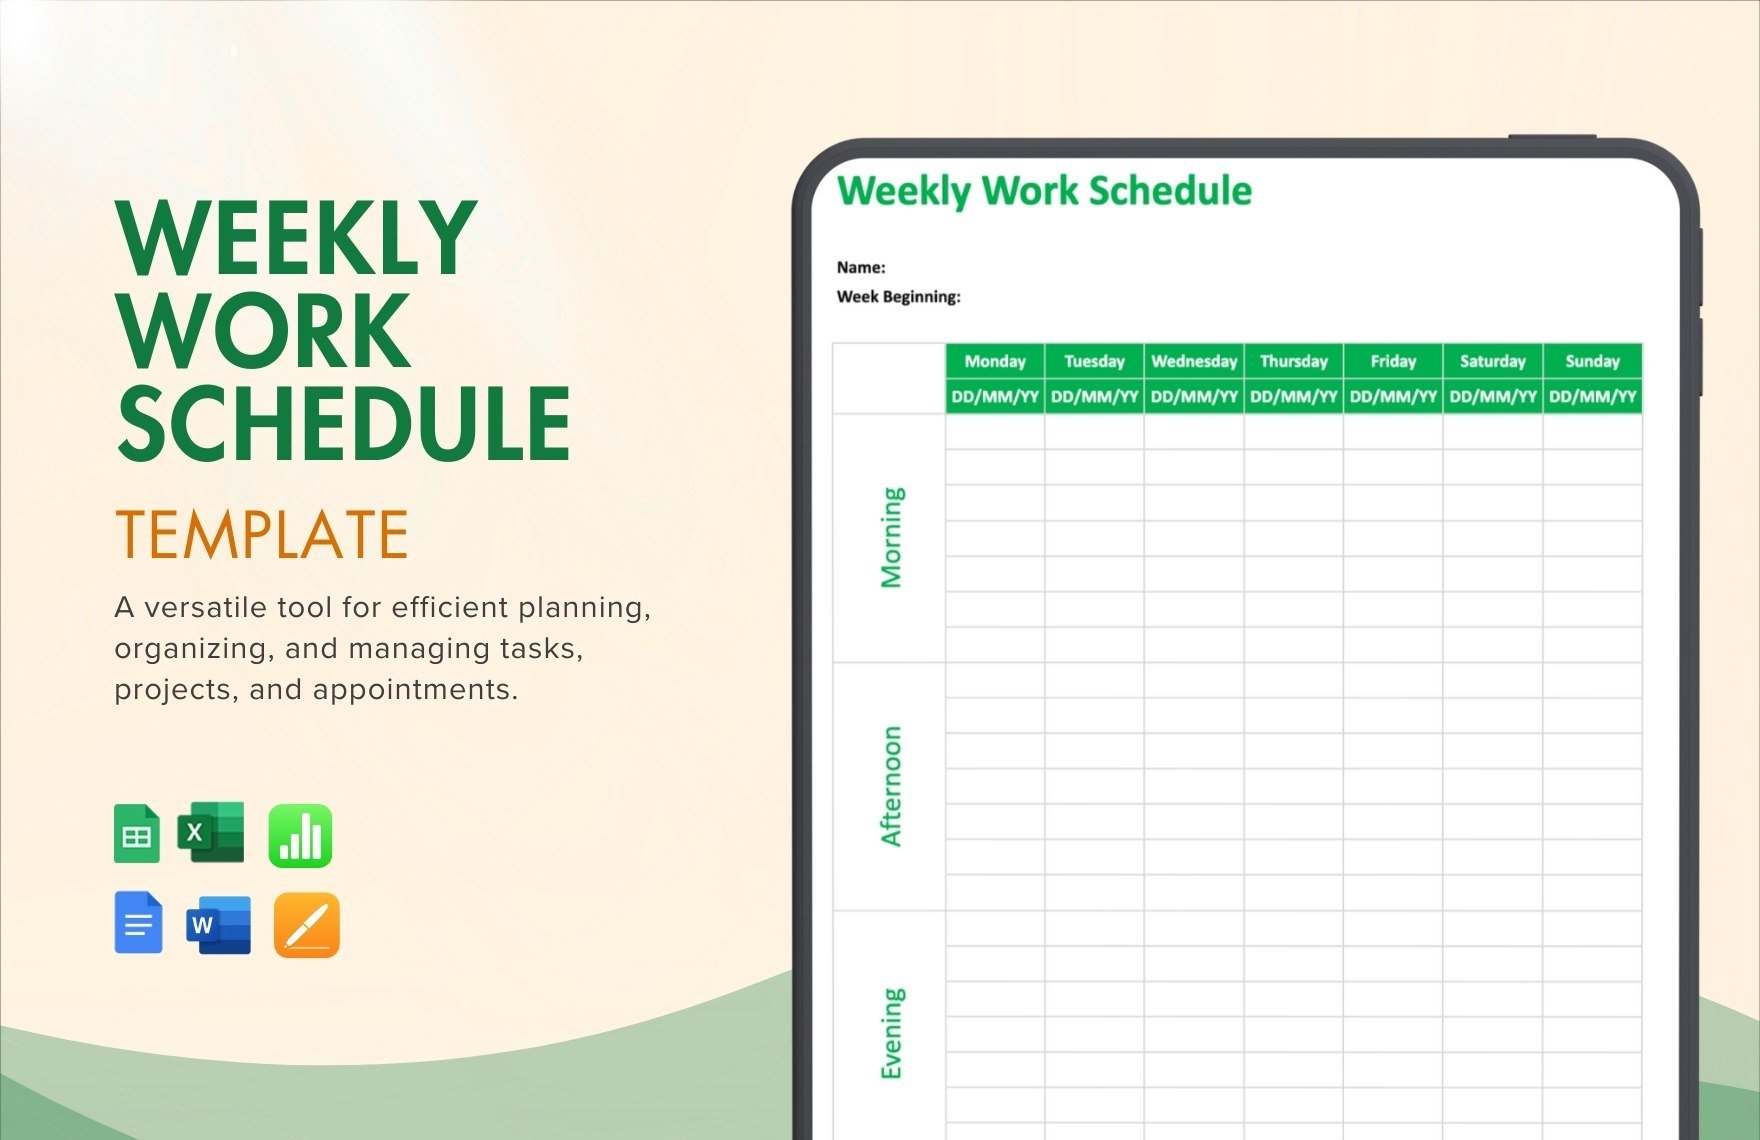 Weekly Work Schedule Template in Word, Google Docs, Excel, Google Sheets, Apple Pages, Apple Numbers